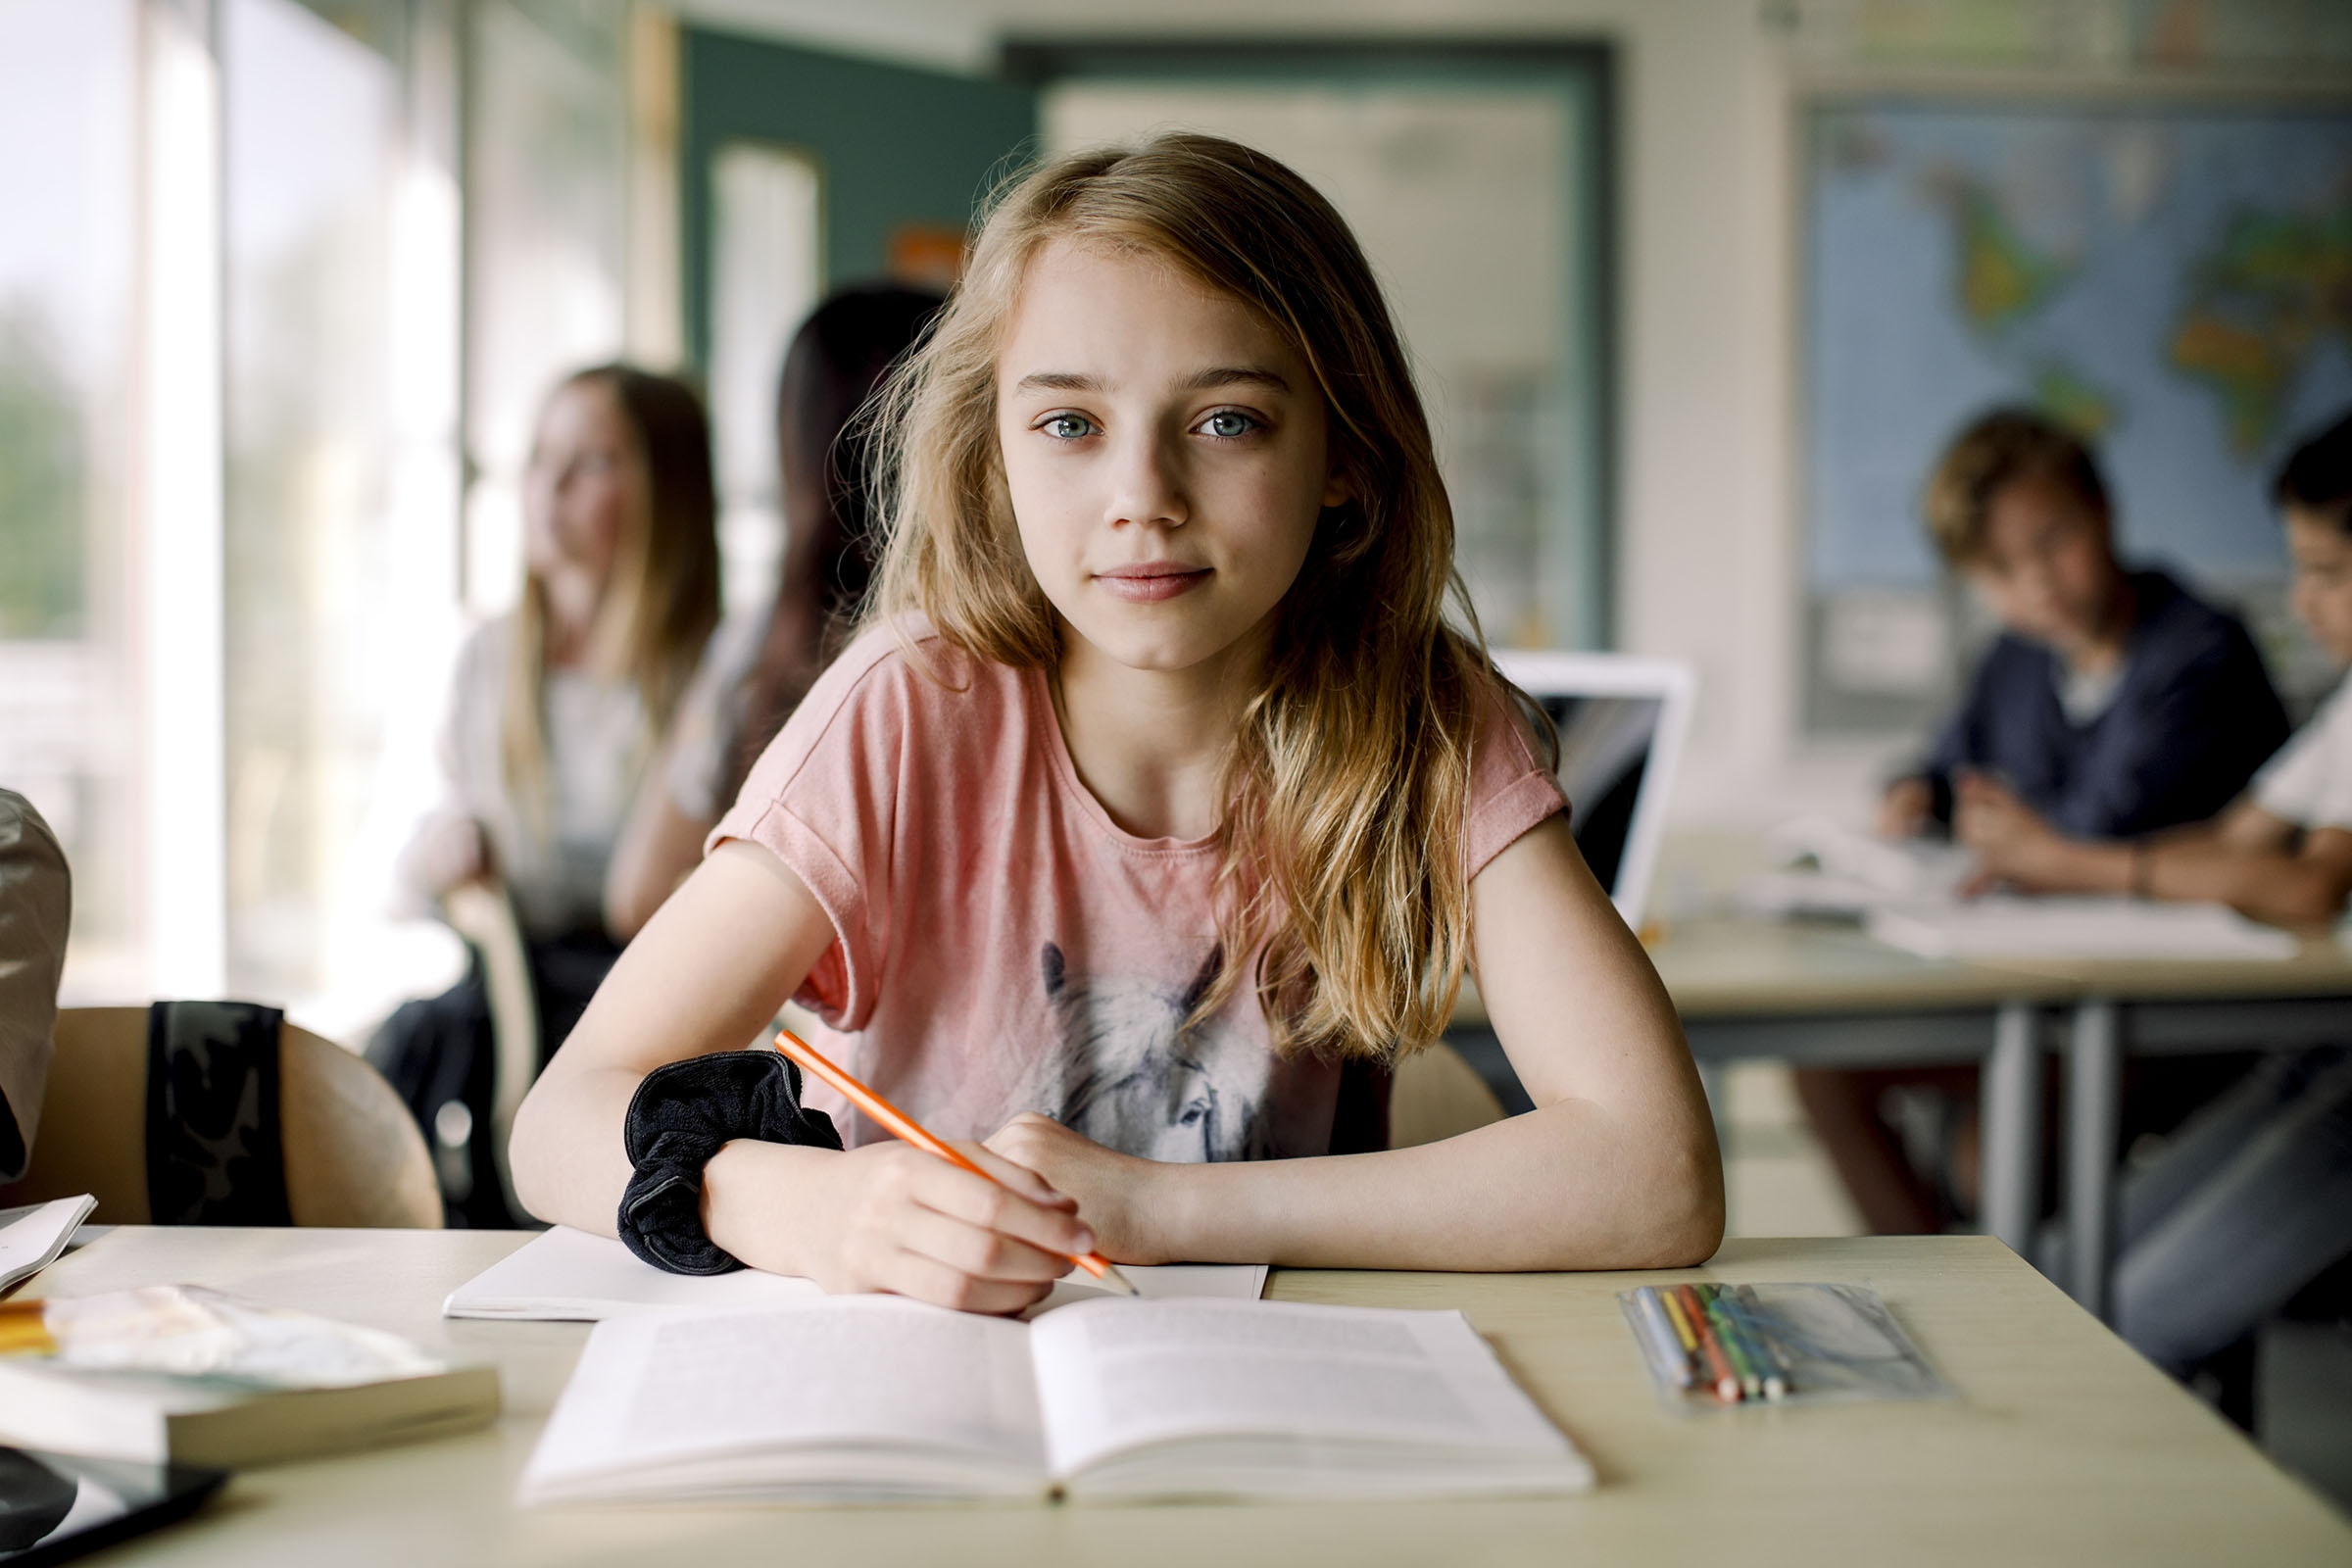 young girl at school desk